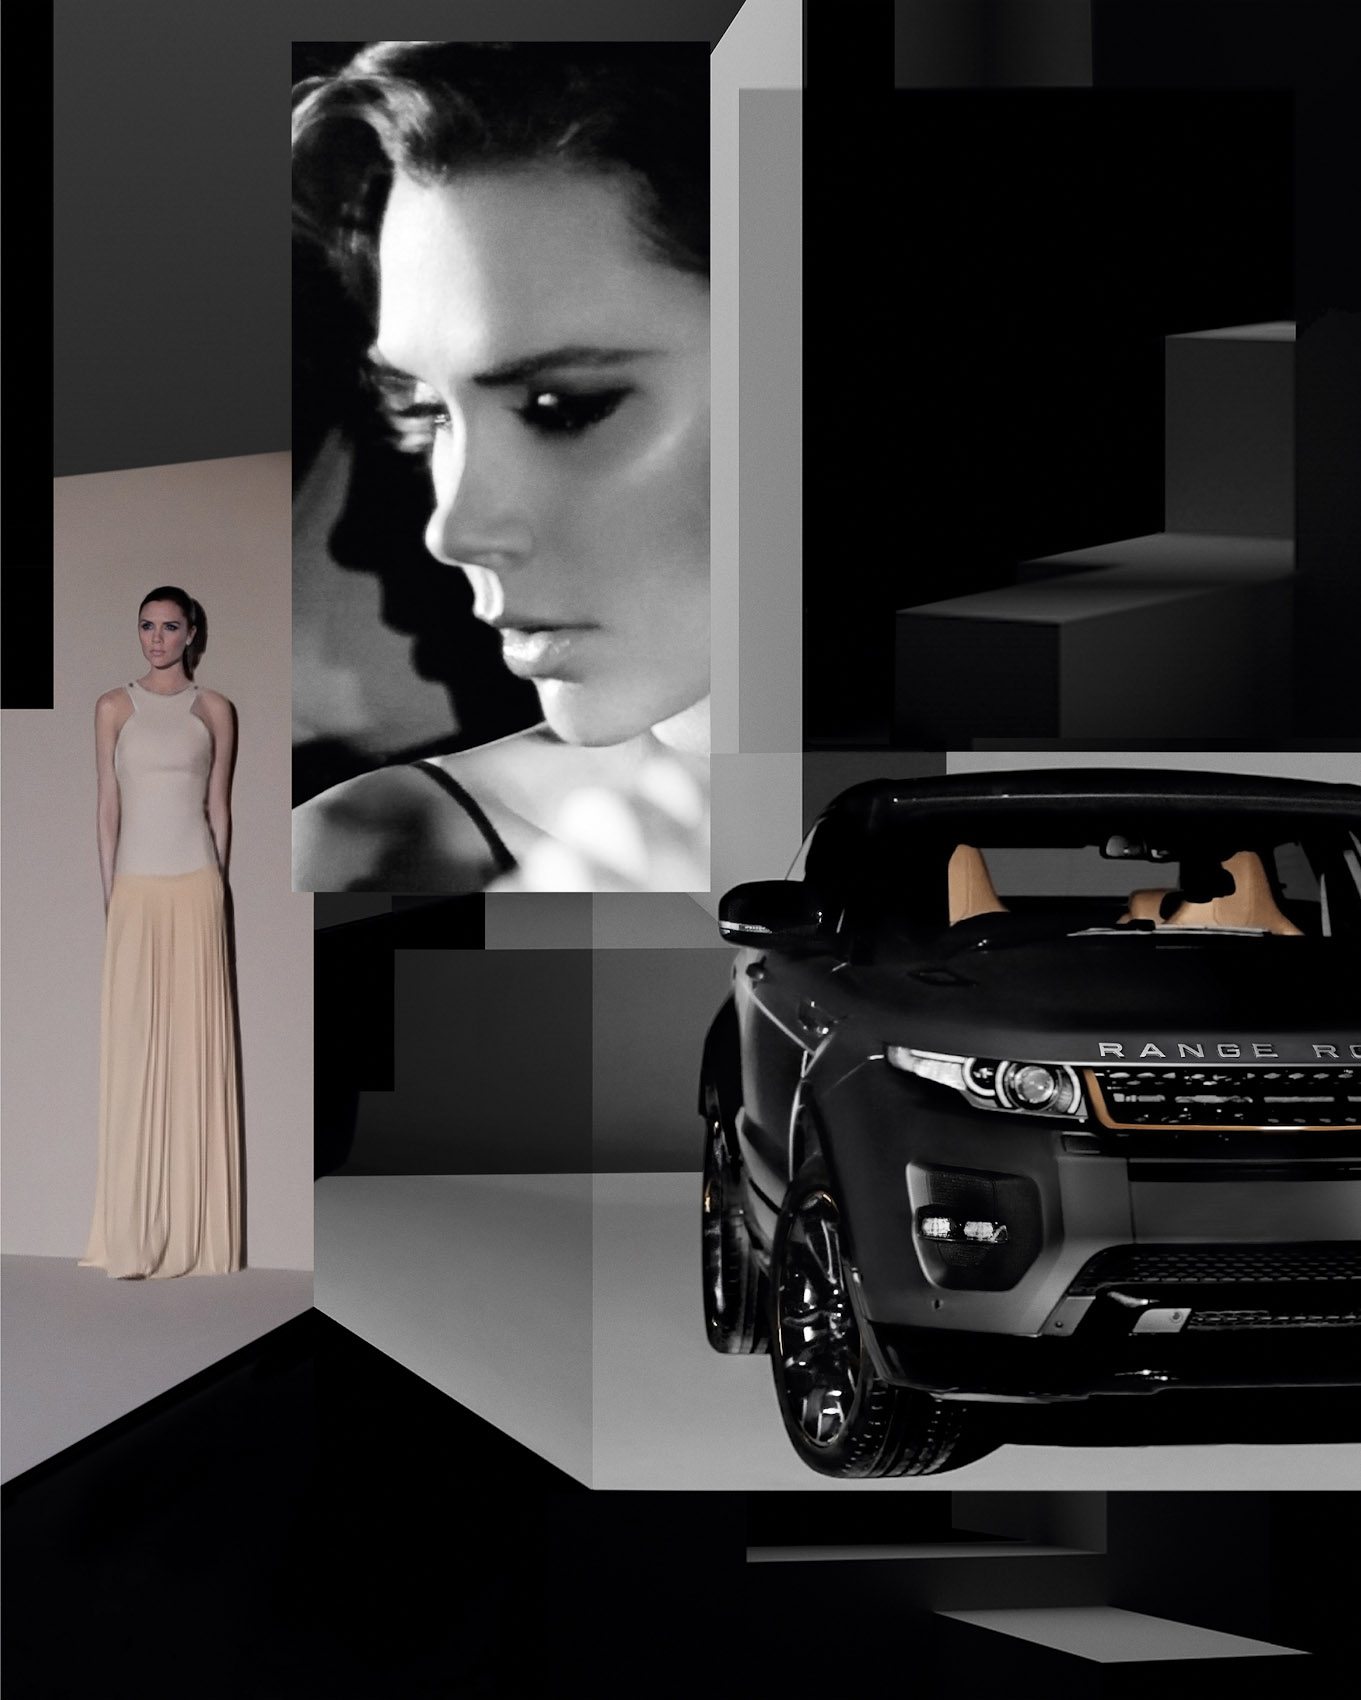 04_nick_knight_shoot_range_rover_evoque_se_with_victoria_beckham_02_rgbnick_knight_shoot_range_rover_evoque_se_with_victoria_beckham_04_rgb-2